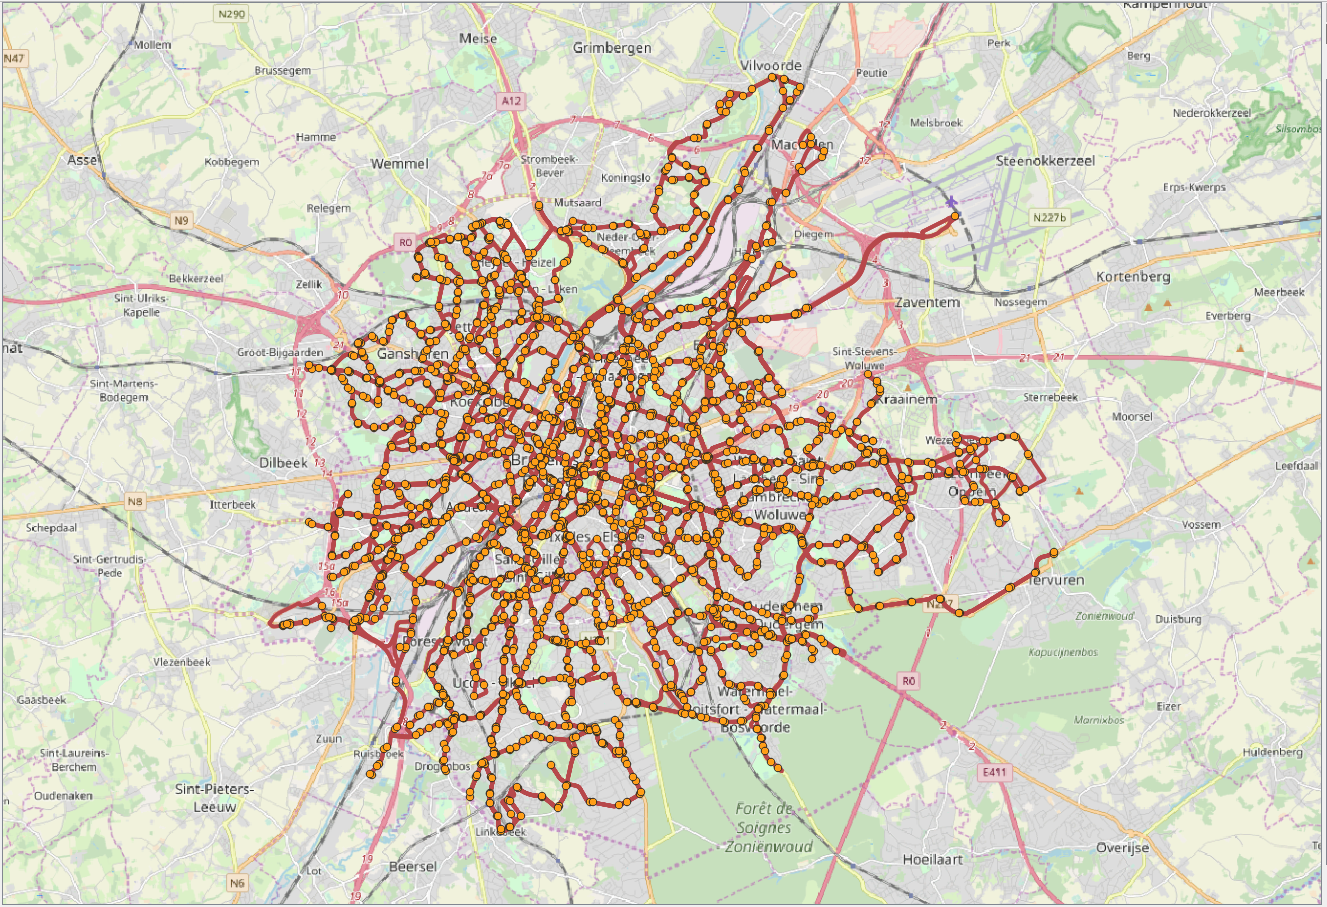 Visualization of the routes and stops for the GTFS data from Brussels.